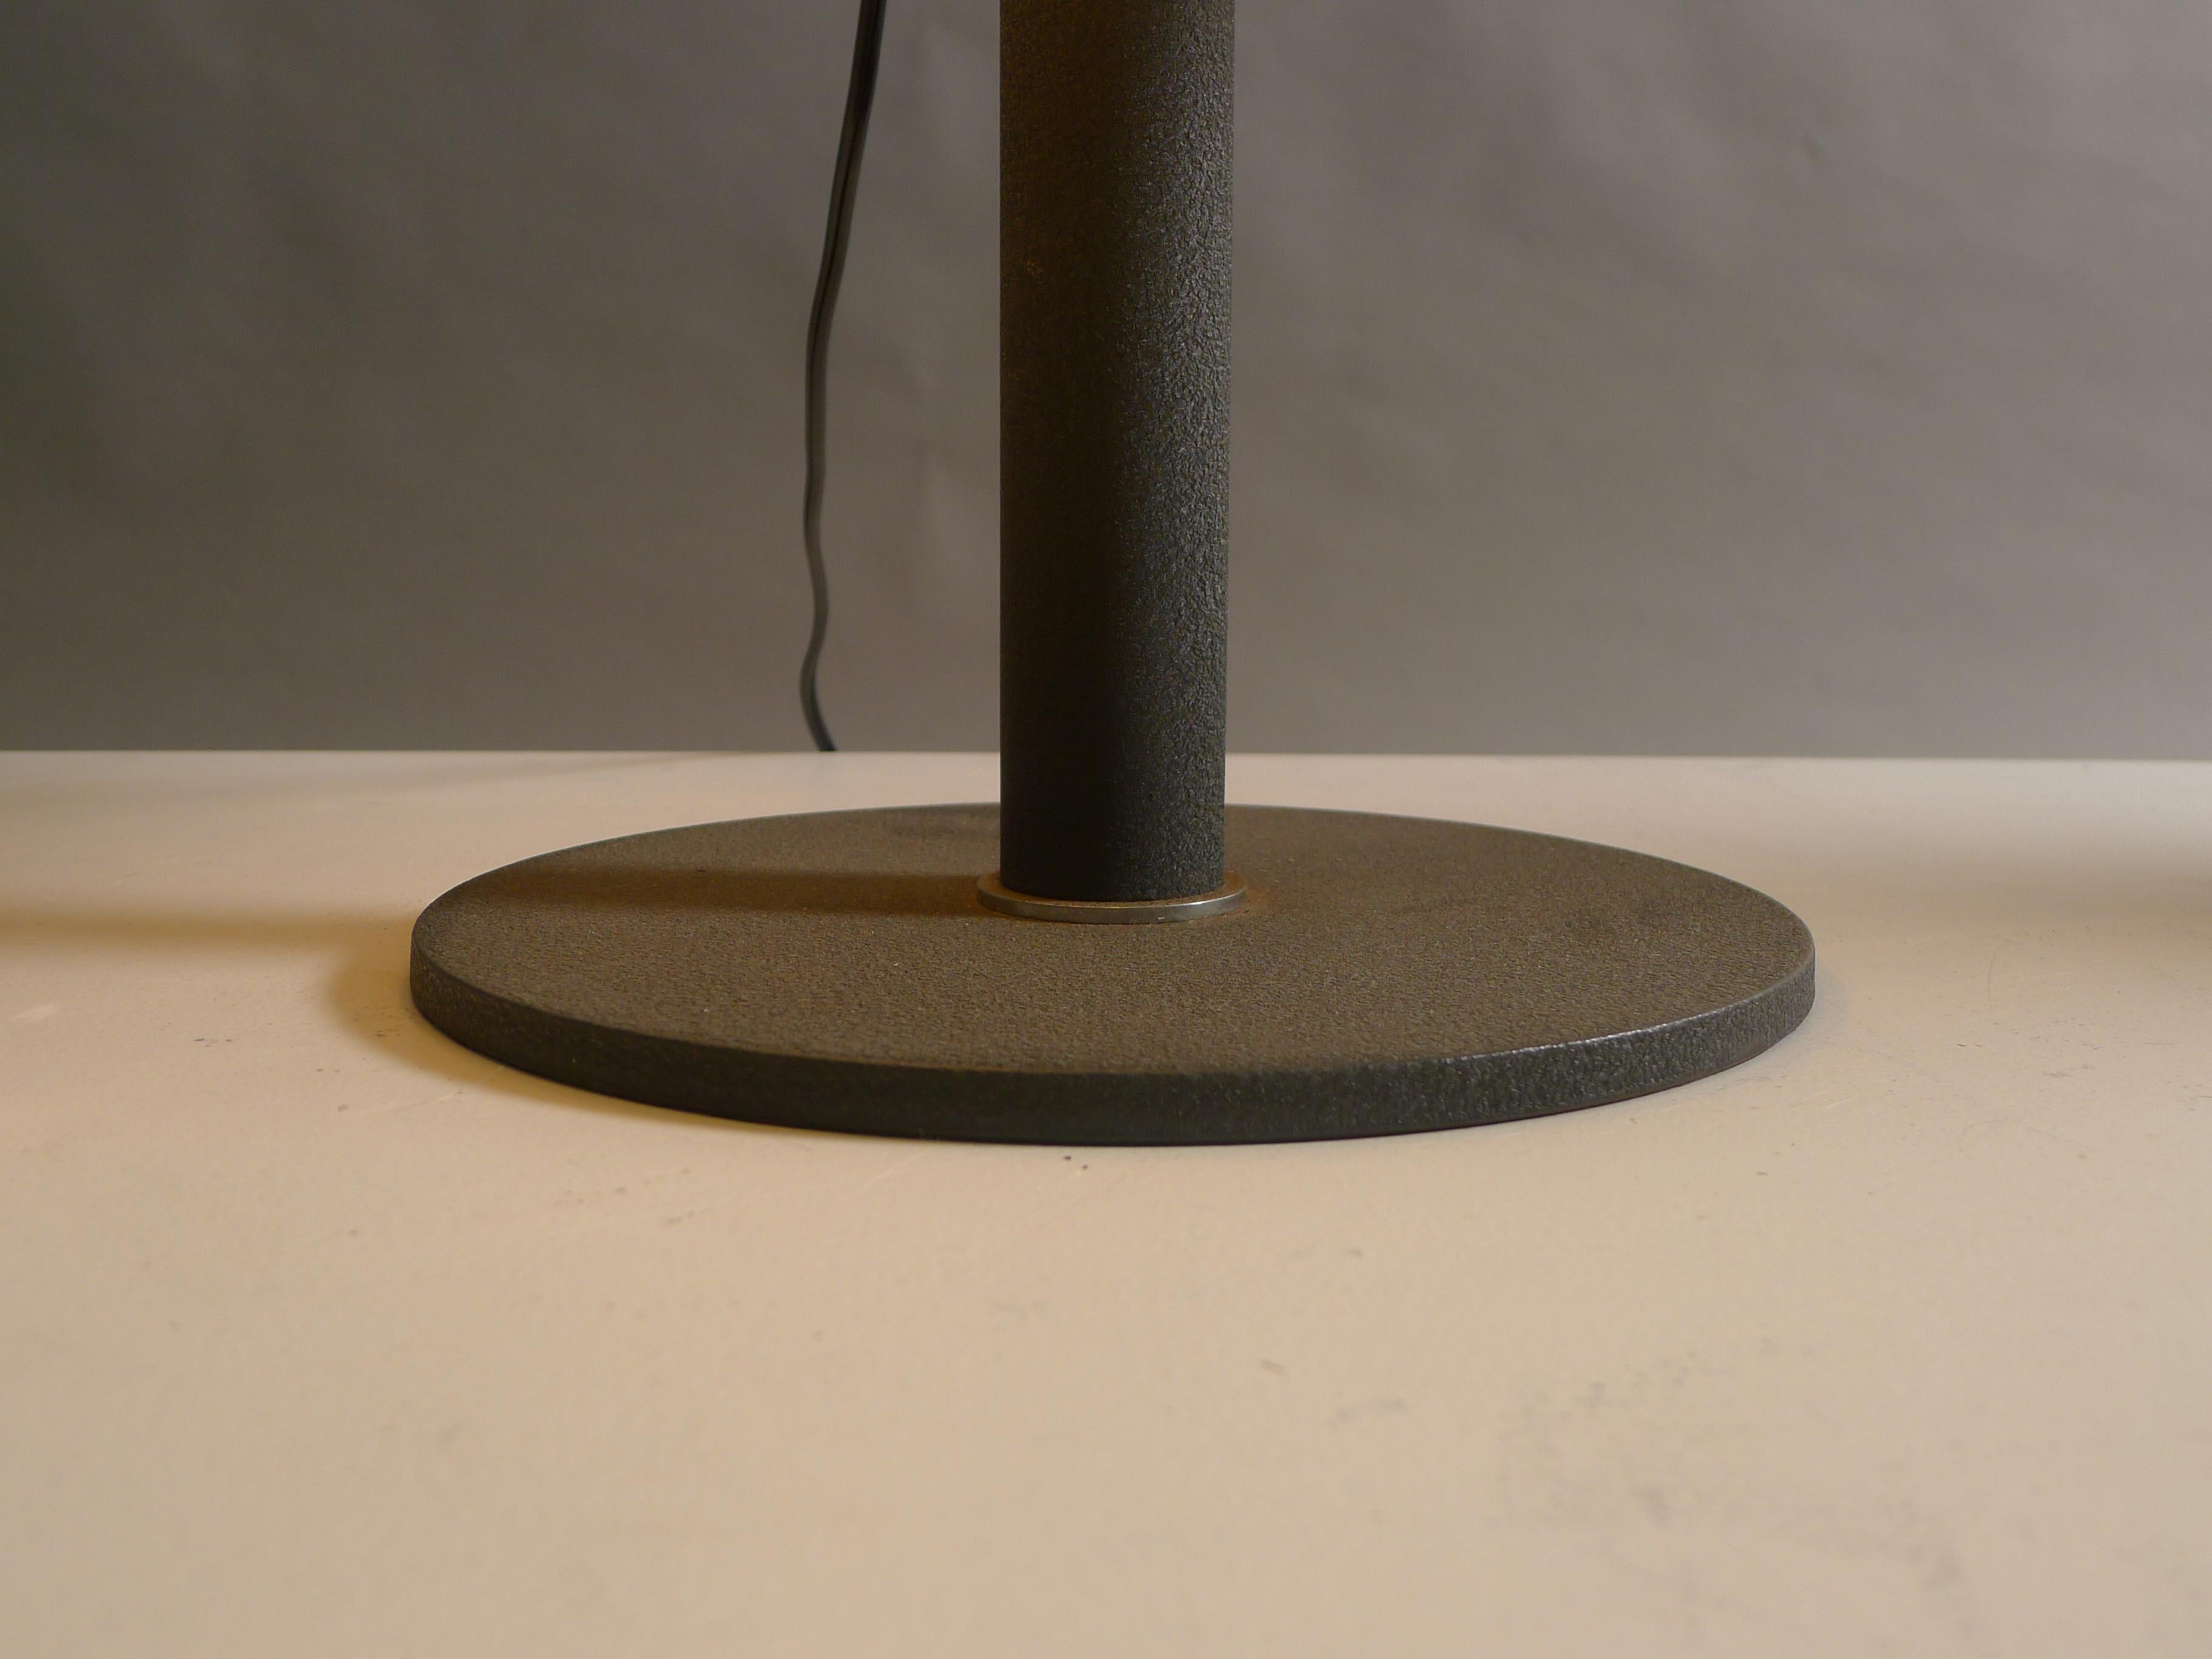 Italian Gino Sarfatti for Arteluce, Italy, Model 609 Table Lamp from 1973, Labelled